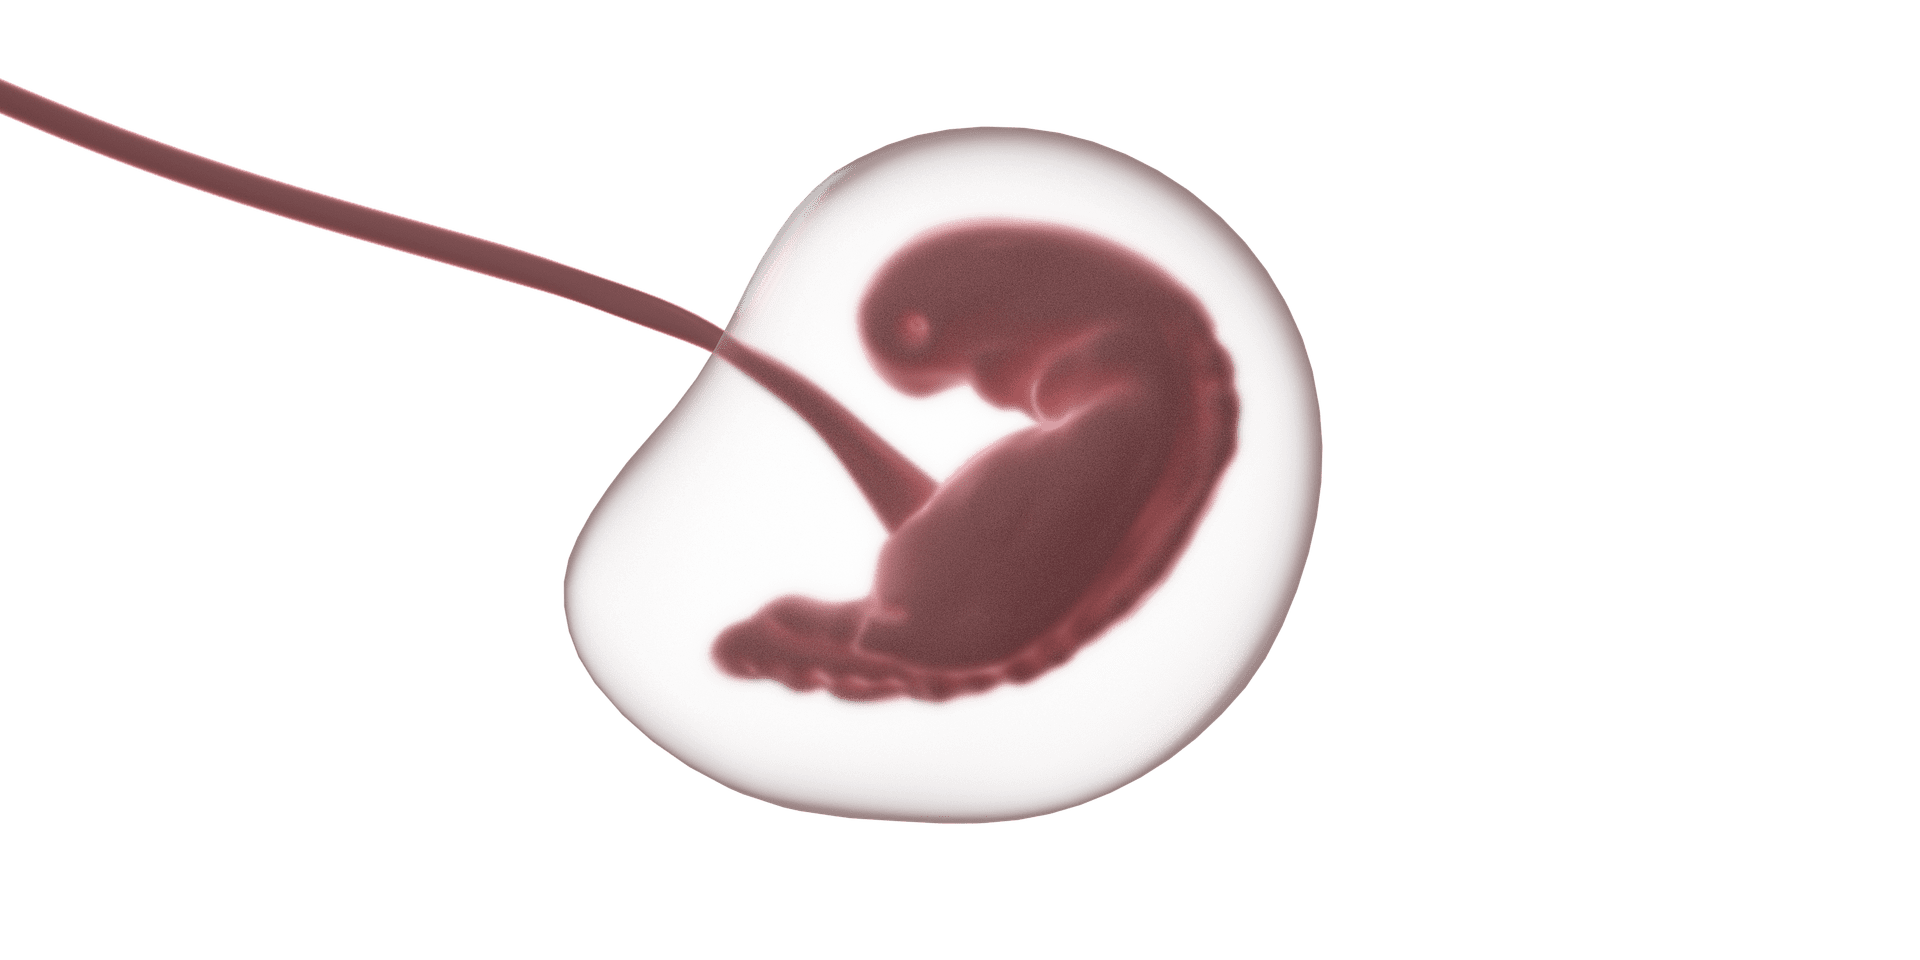 Pictured - A photo of a fetus during gestation | Source: Pixabay 